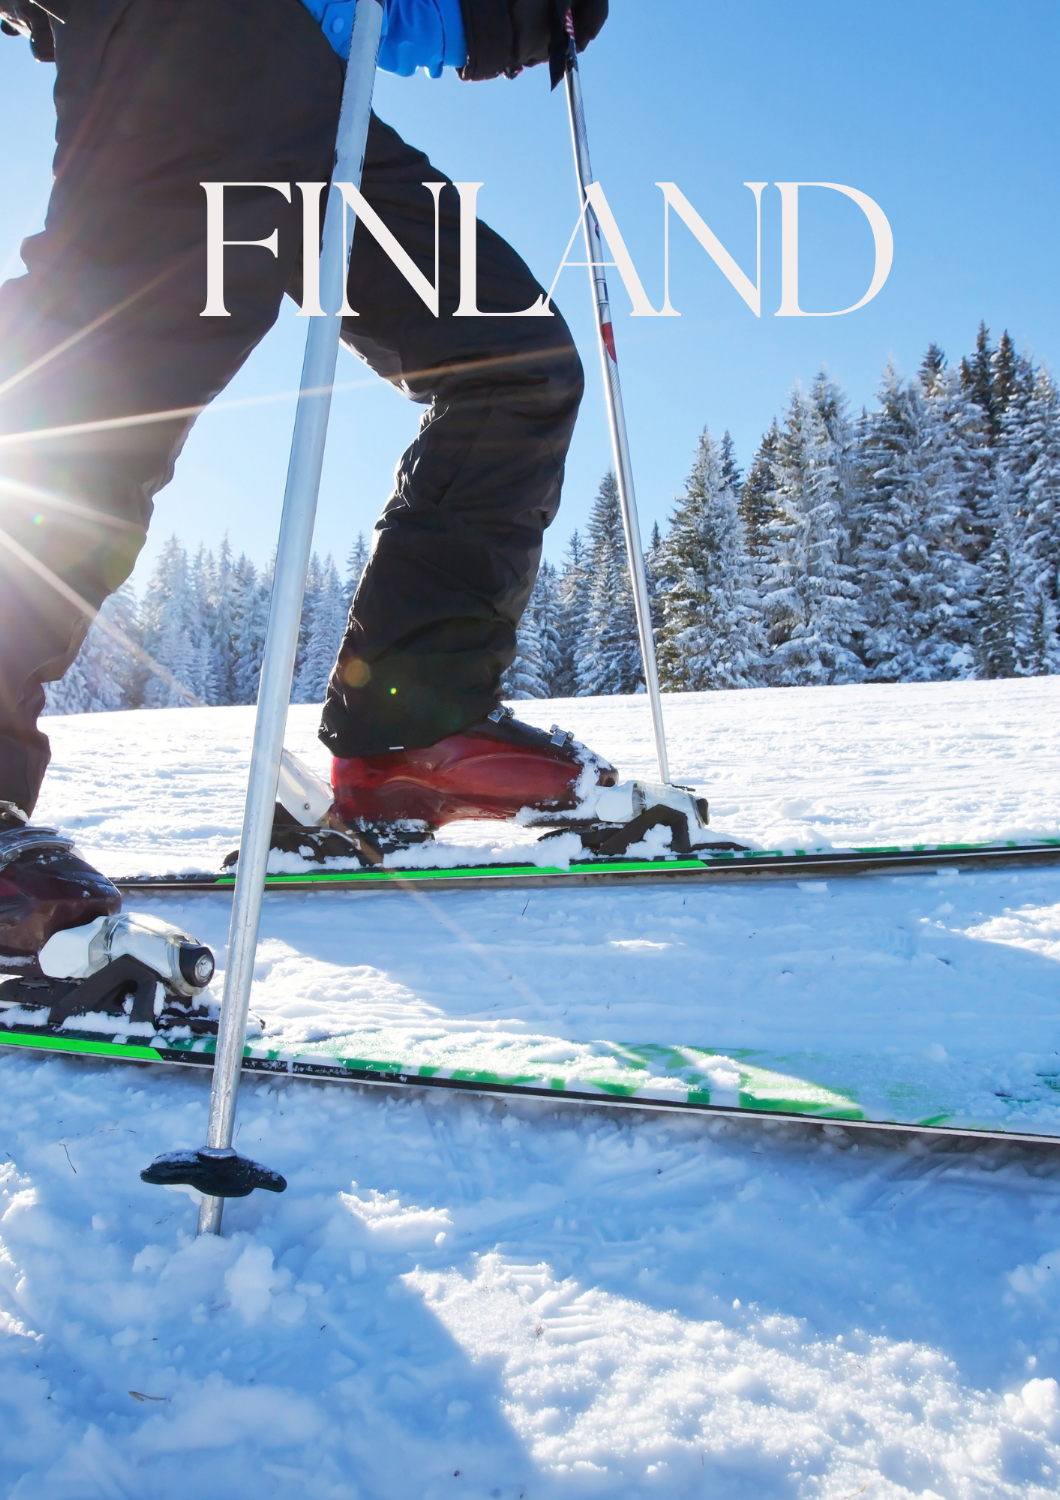 Traditional cross-country skiing in Finland